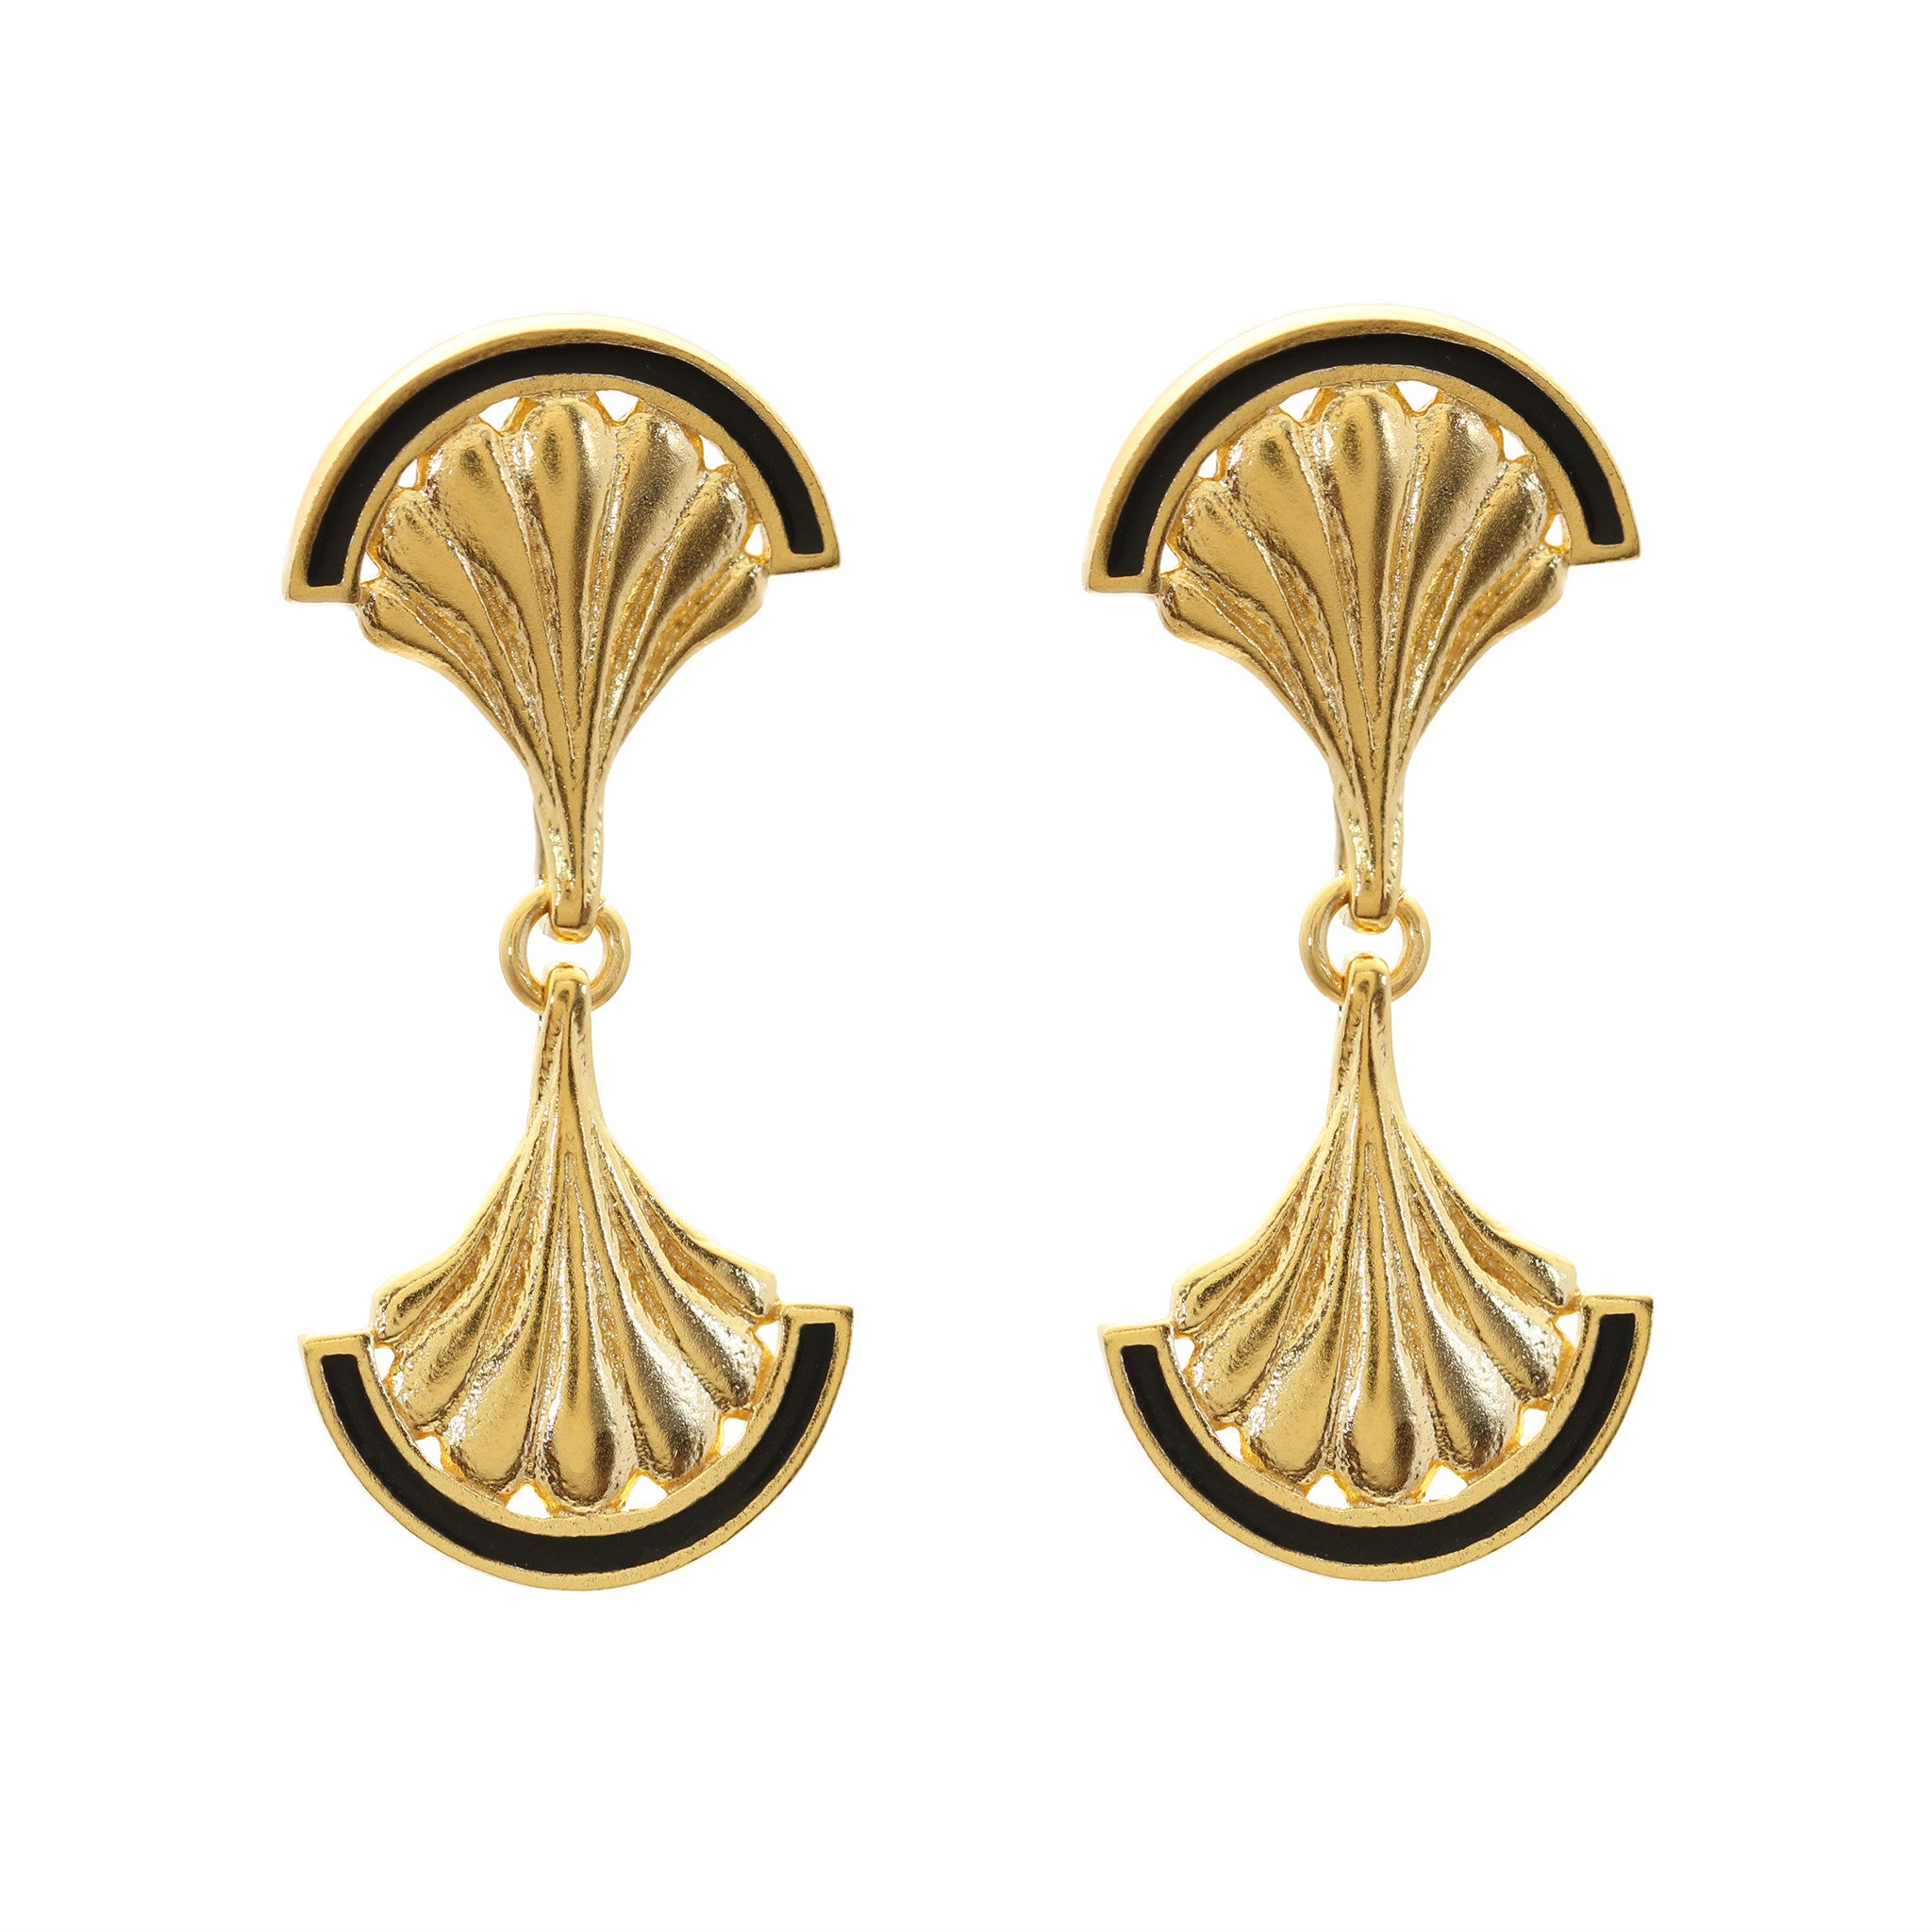 A pair of gold shell drop earrings with black enamel detail